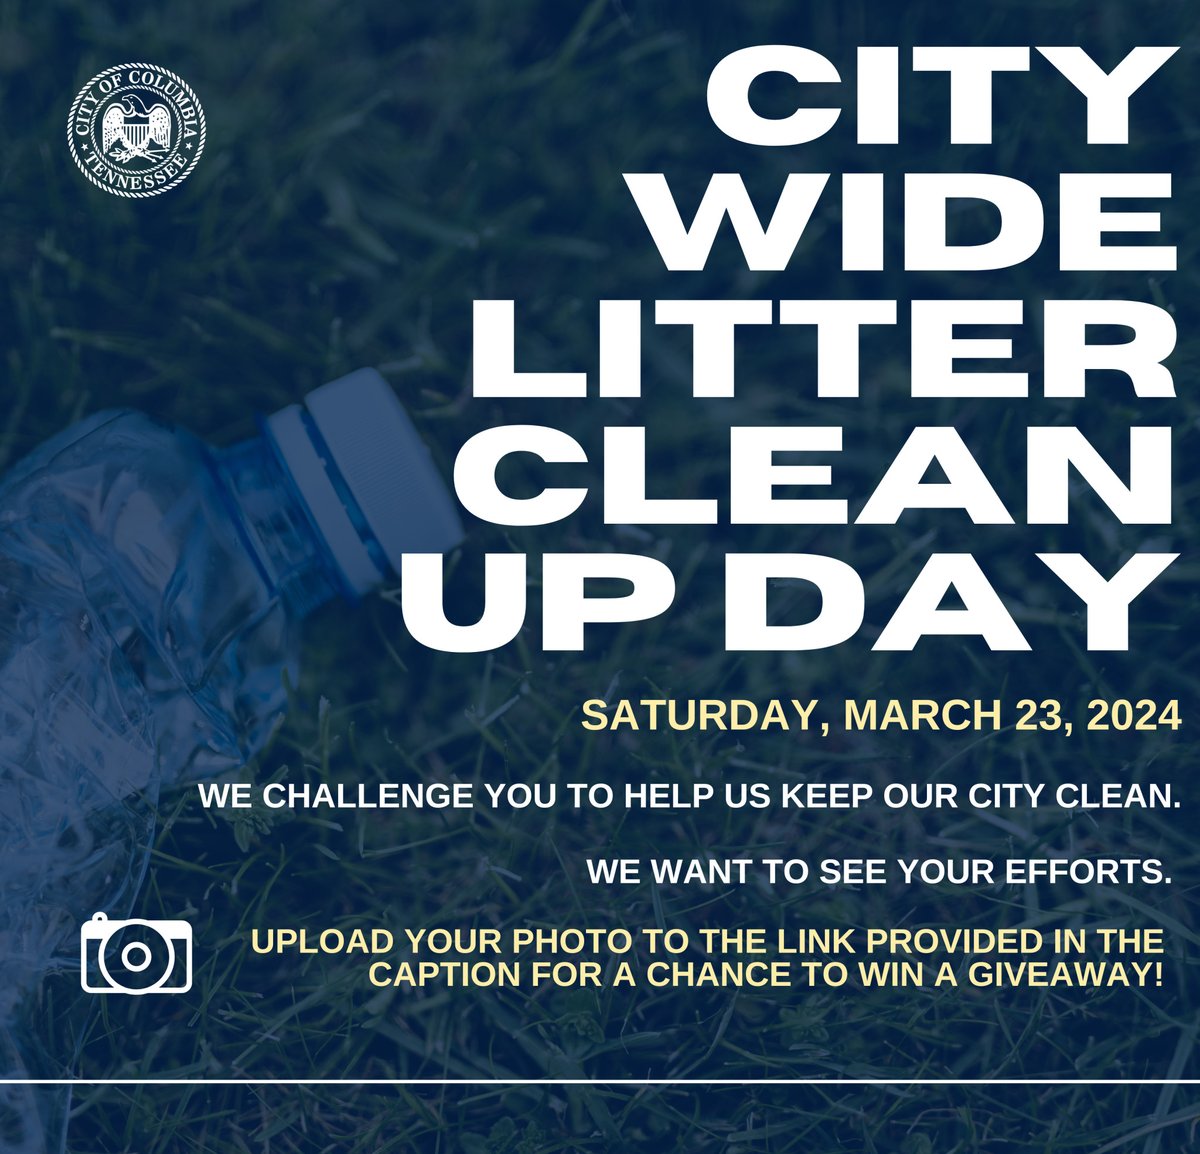 Let's roll up our sleeves and make a difference together! 🚯 Join us for a citywide litter clean-up day on 3/23/24. Upload a photo of your efforts to bit.ly/4c36A22 for a chance to be entered into a giveaway! Let's do our part & leave and impact. 💚 #CityofColumbiaTN